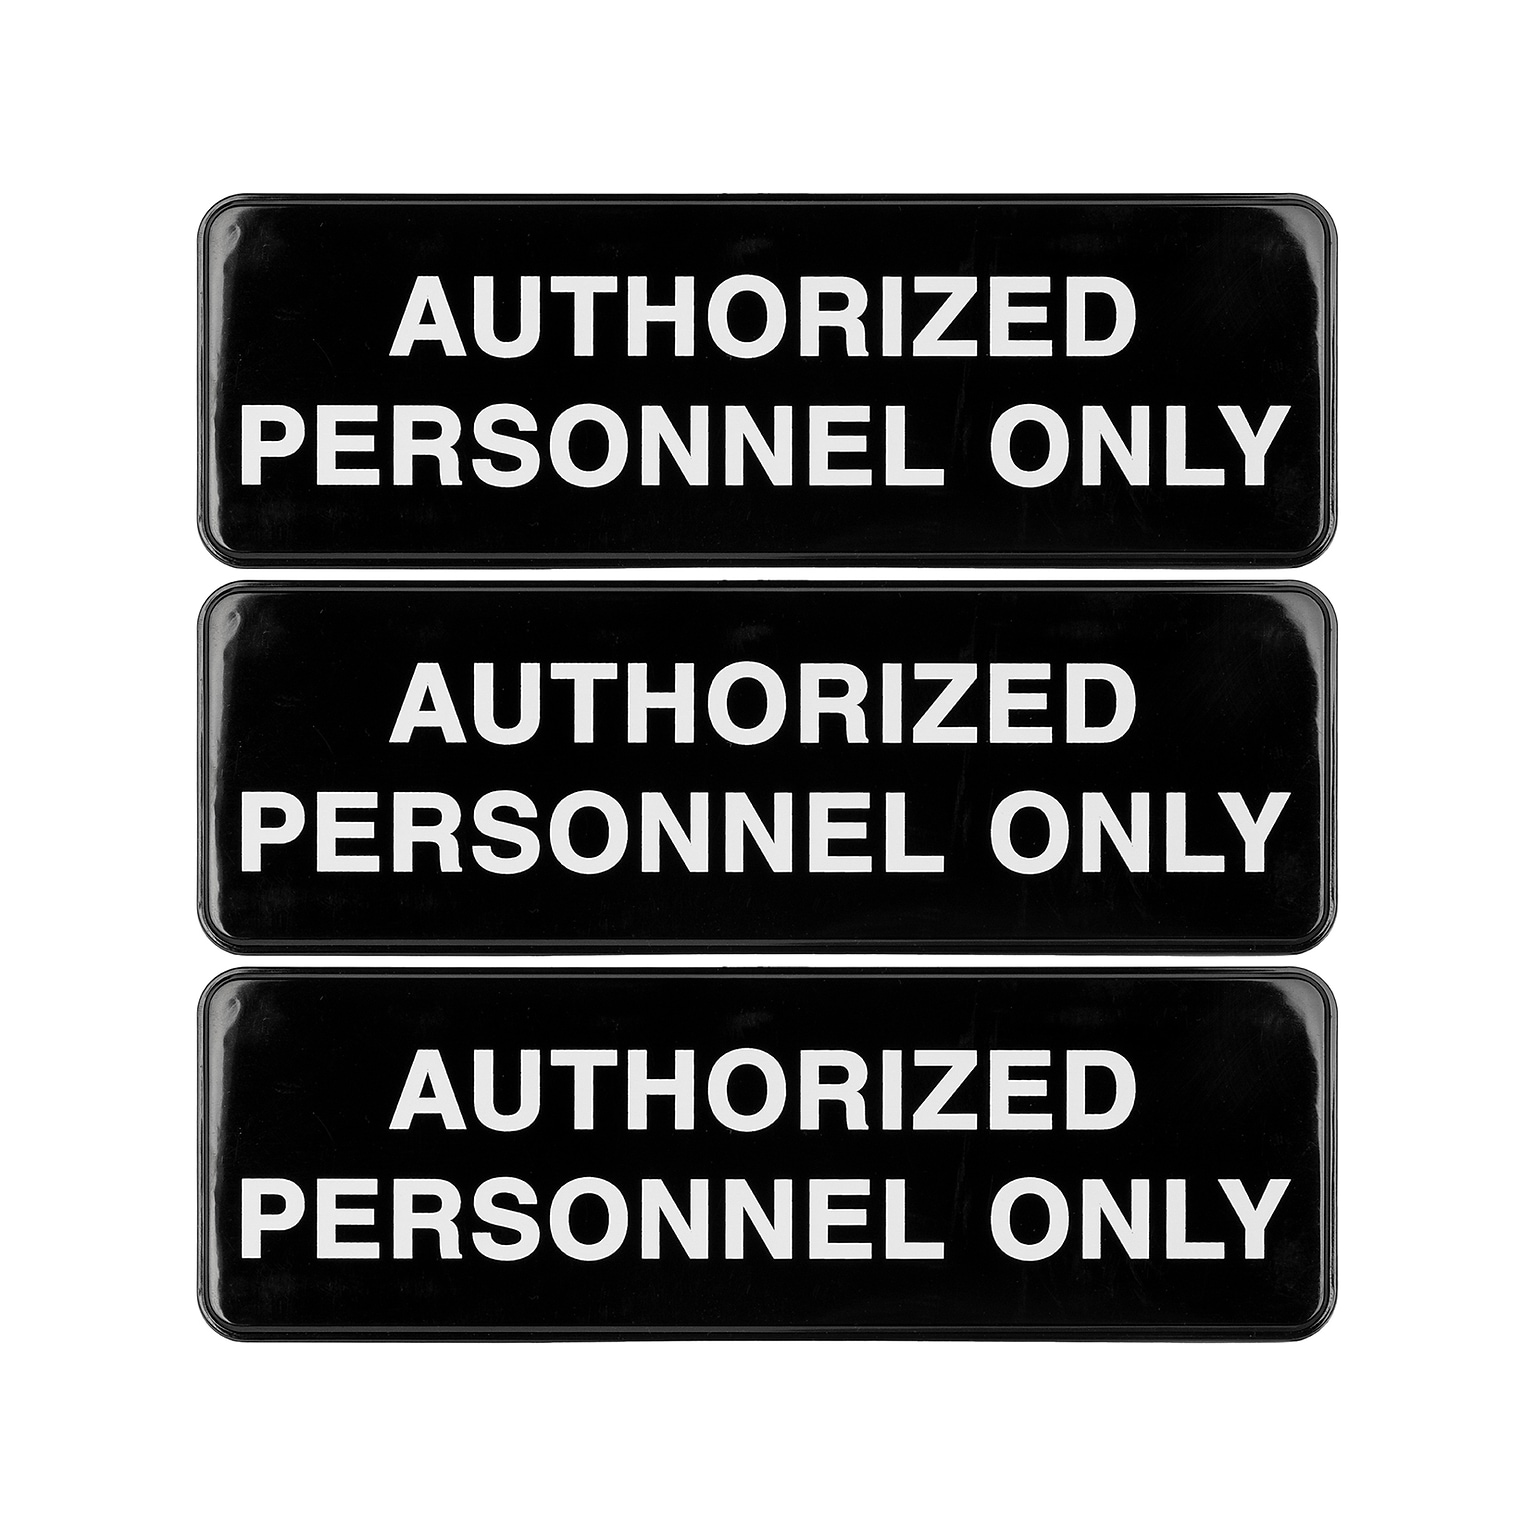 Excello Global Products Authorized Personnel Only Indoor/Outdoor Wall Sign, 9 x 3, Black/White, 3/Pack (EGP-HD-0262-S)